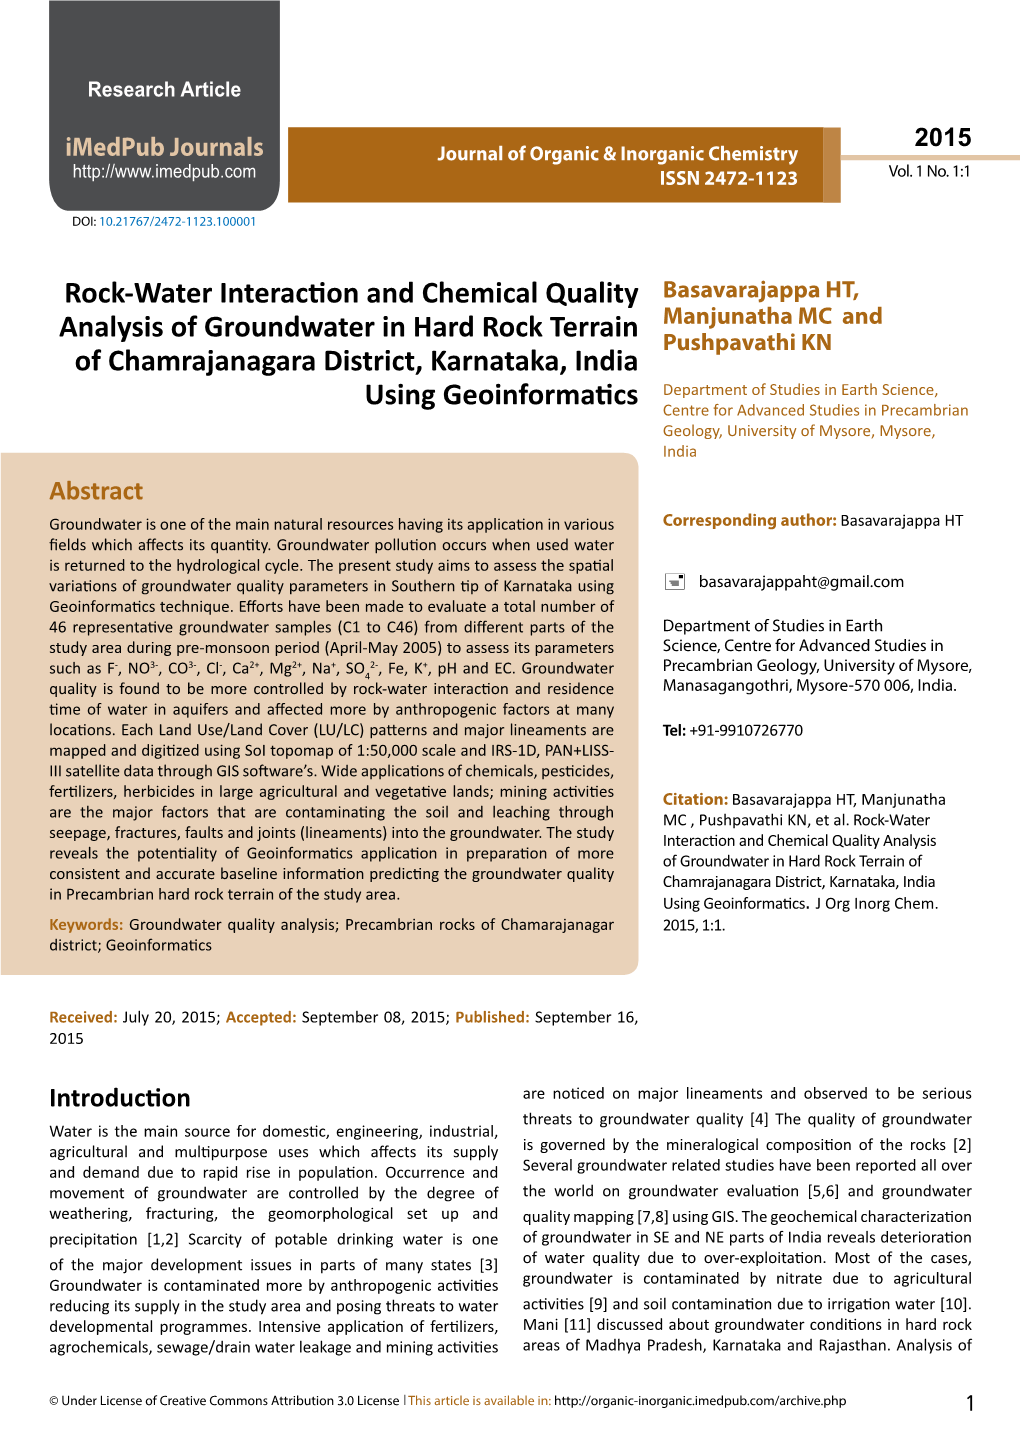 Rock-Water Interaction and Chemical Quality Analysis of Groundwater In